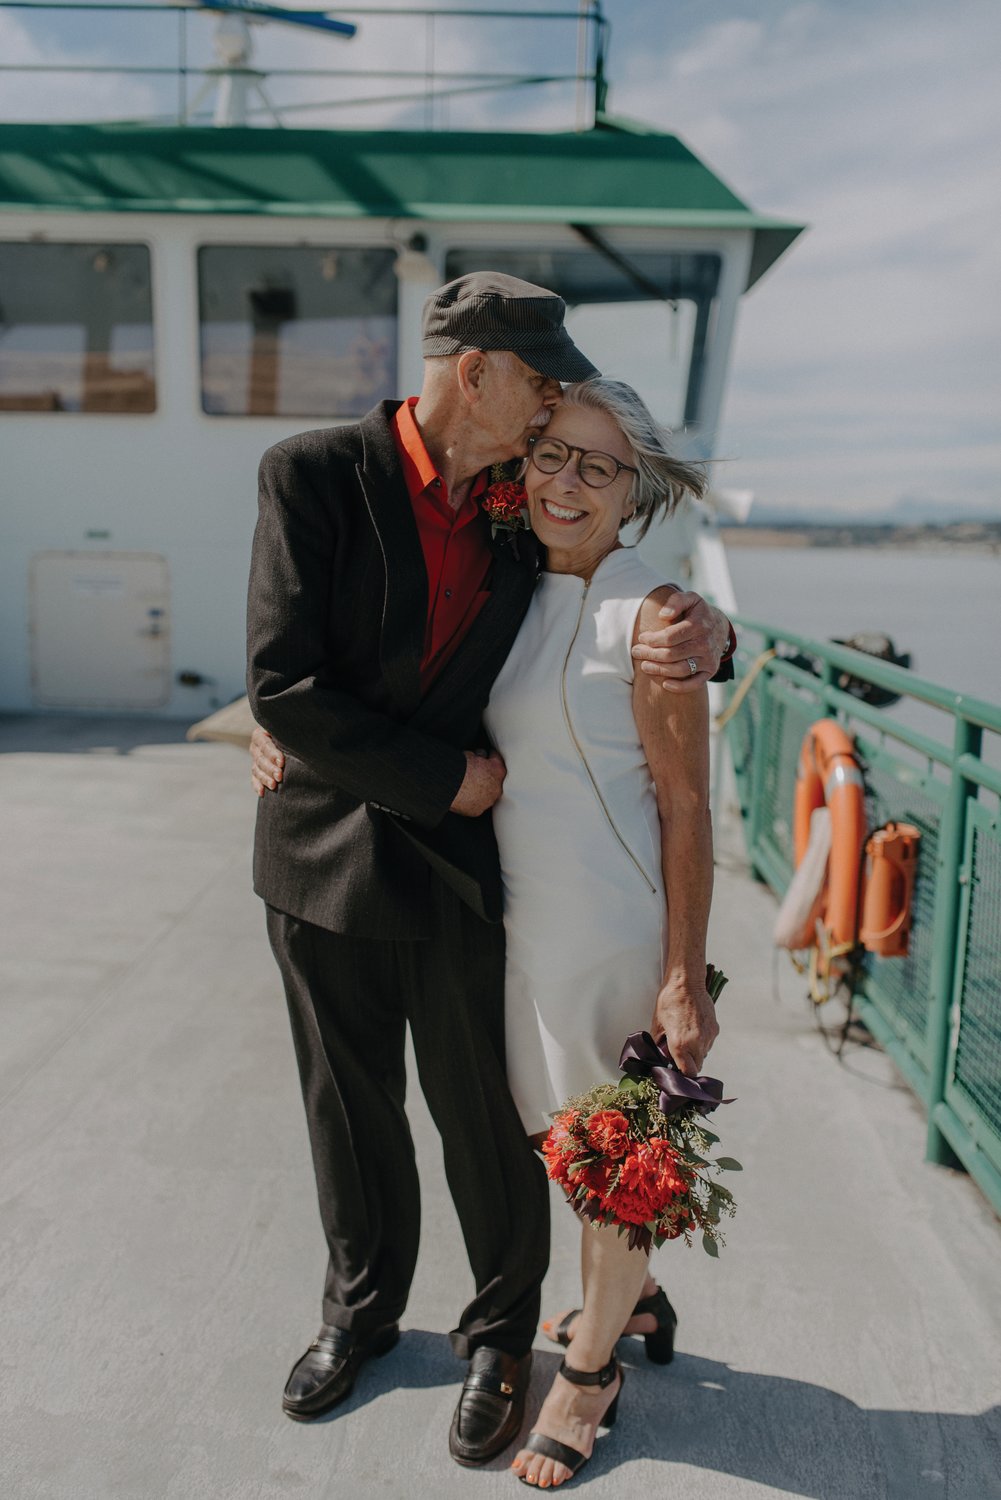 Local couple Alan Johanson and Carol Heimhartner found each other through a dating website for seniors. Ten months later, they were married.